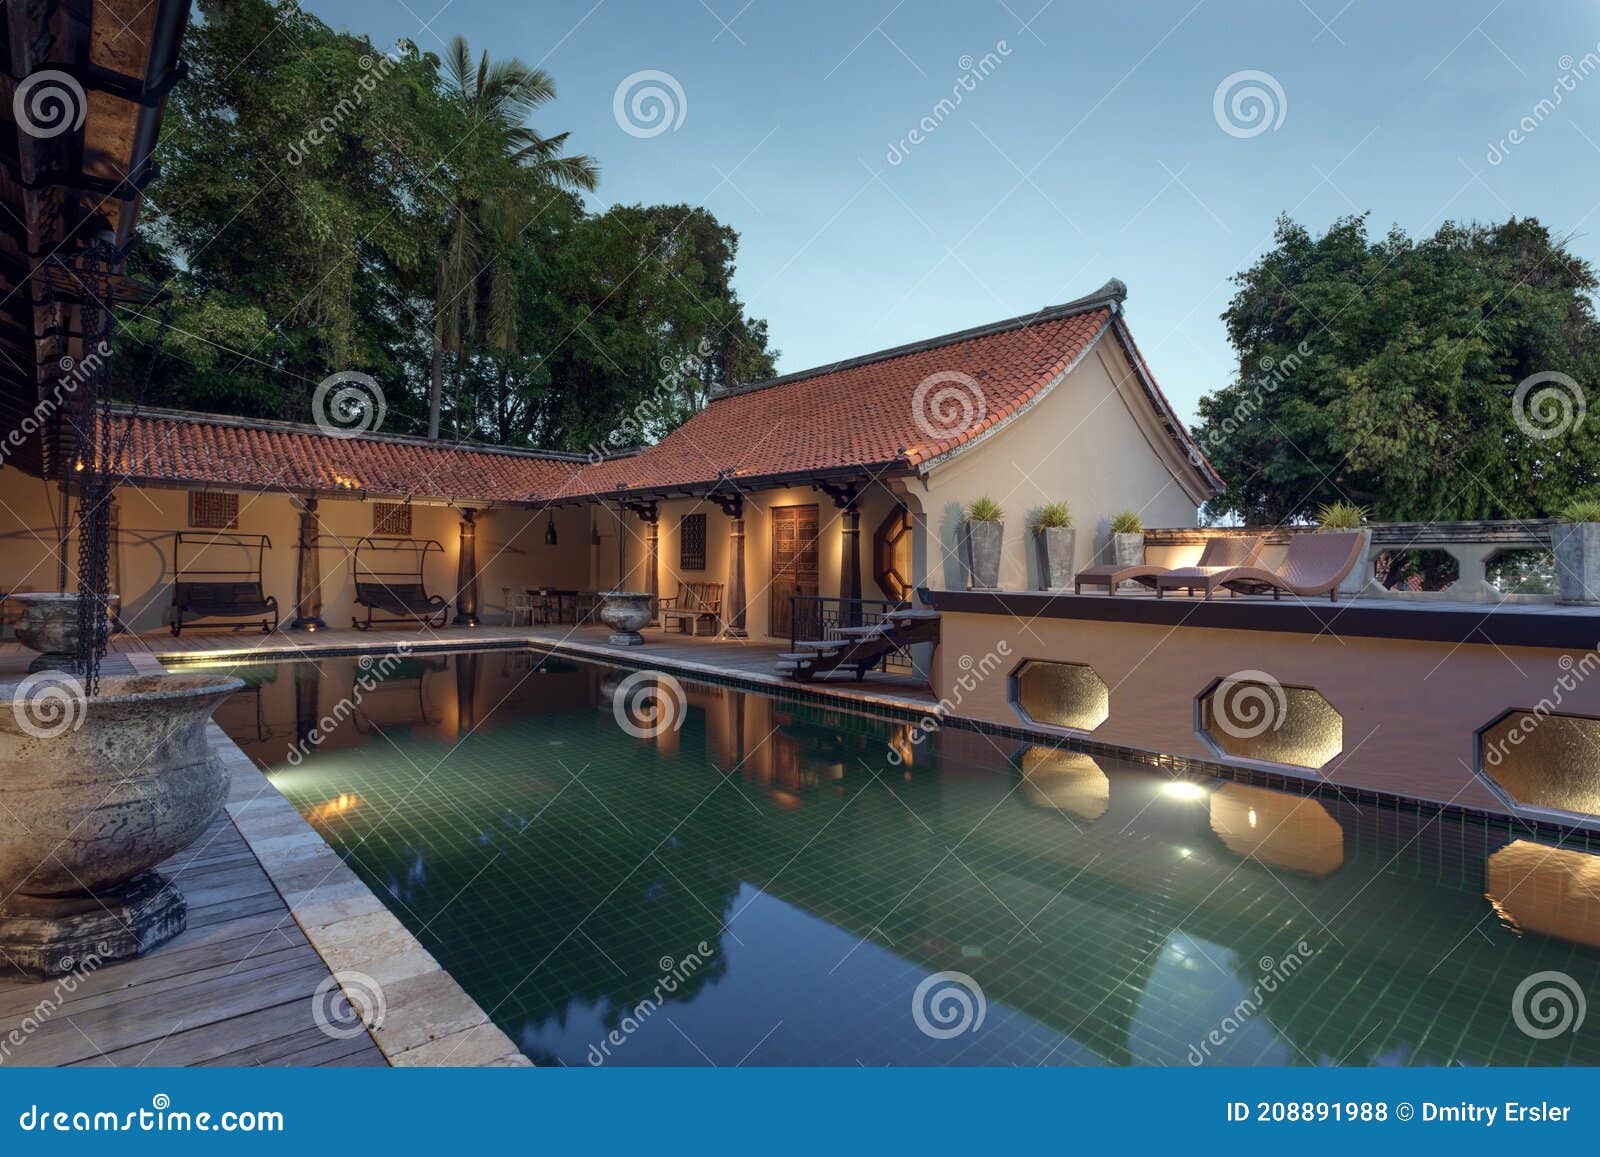 house with swimming pool in the middle